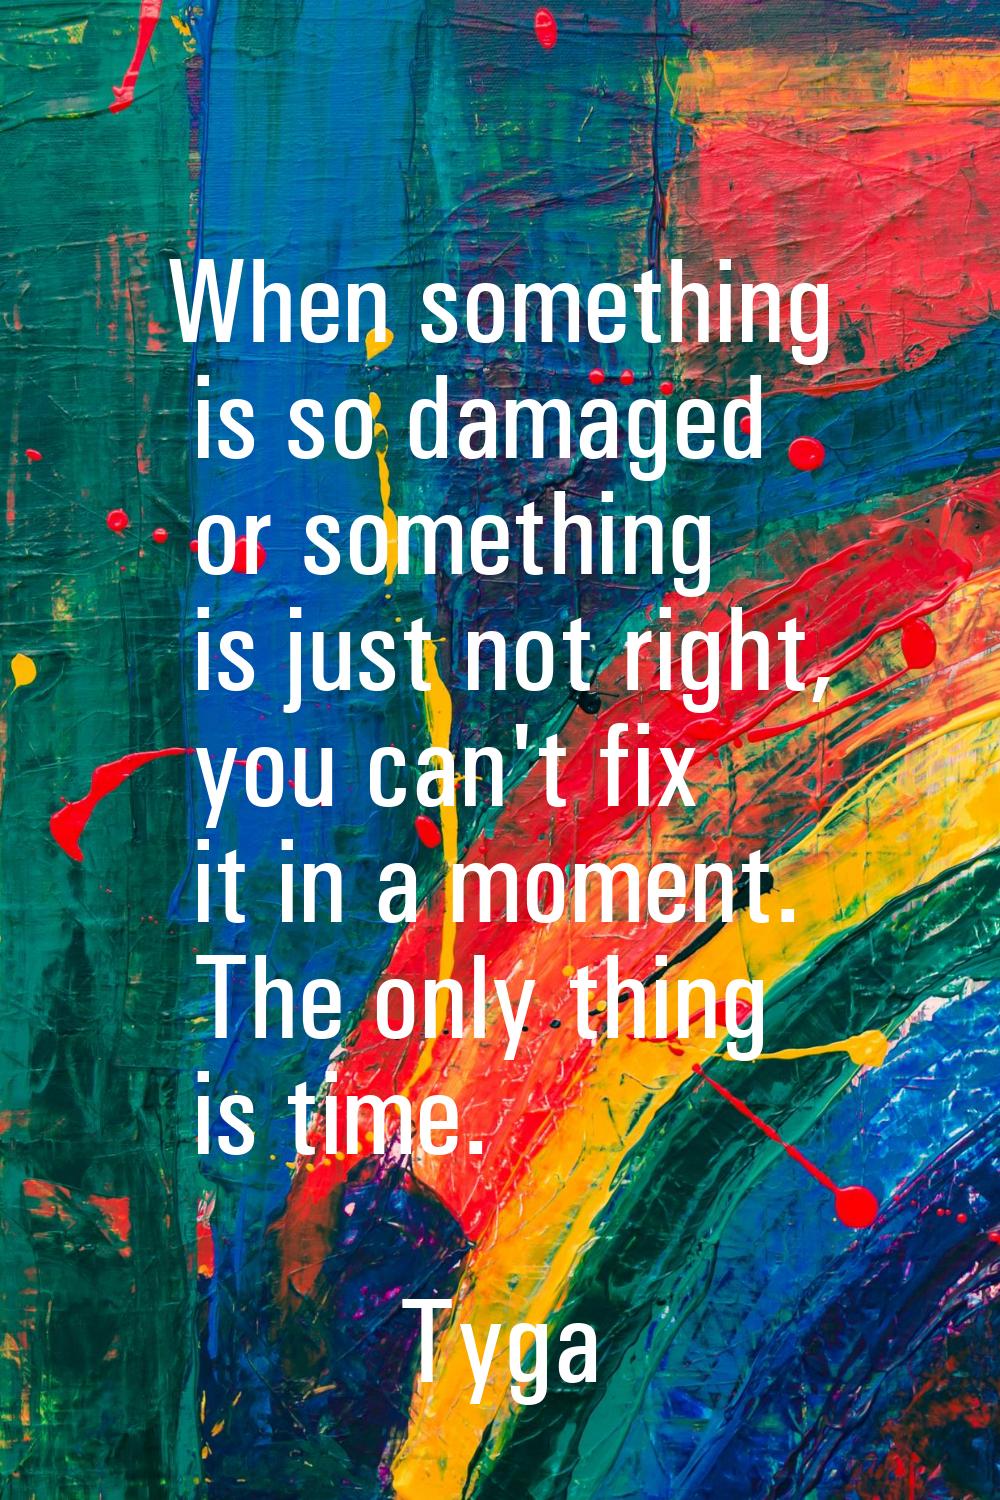 When something is so damaged or something is just not right, you can't fix it in a moment. The only